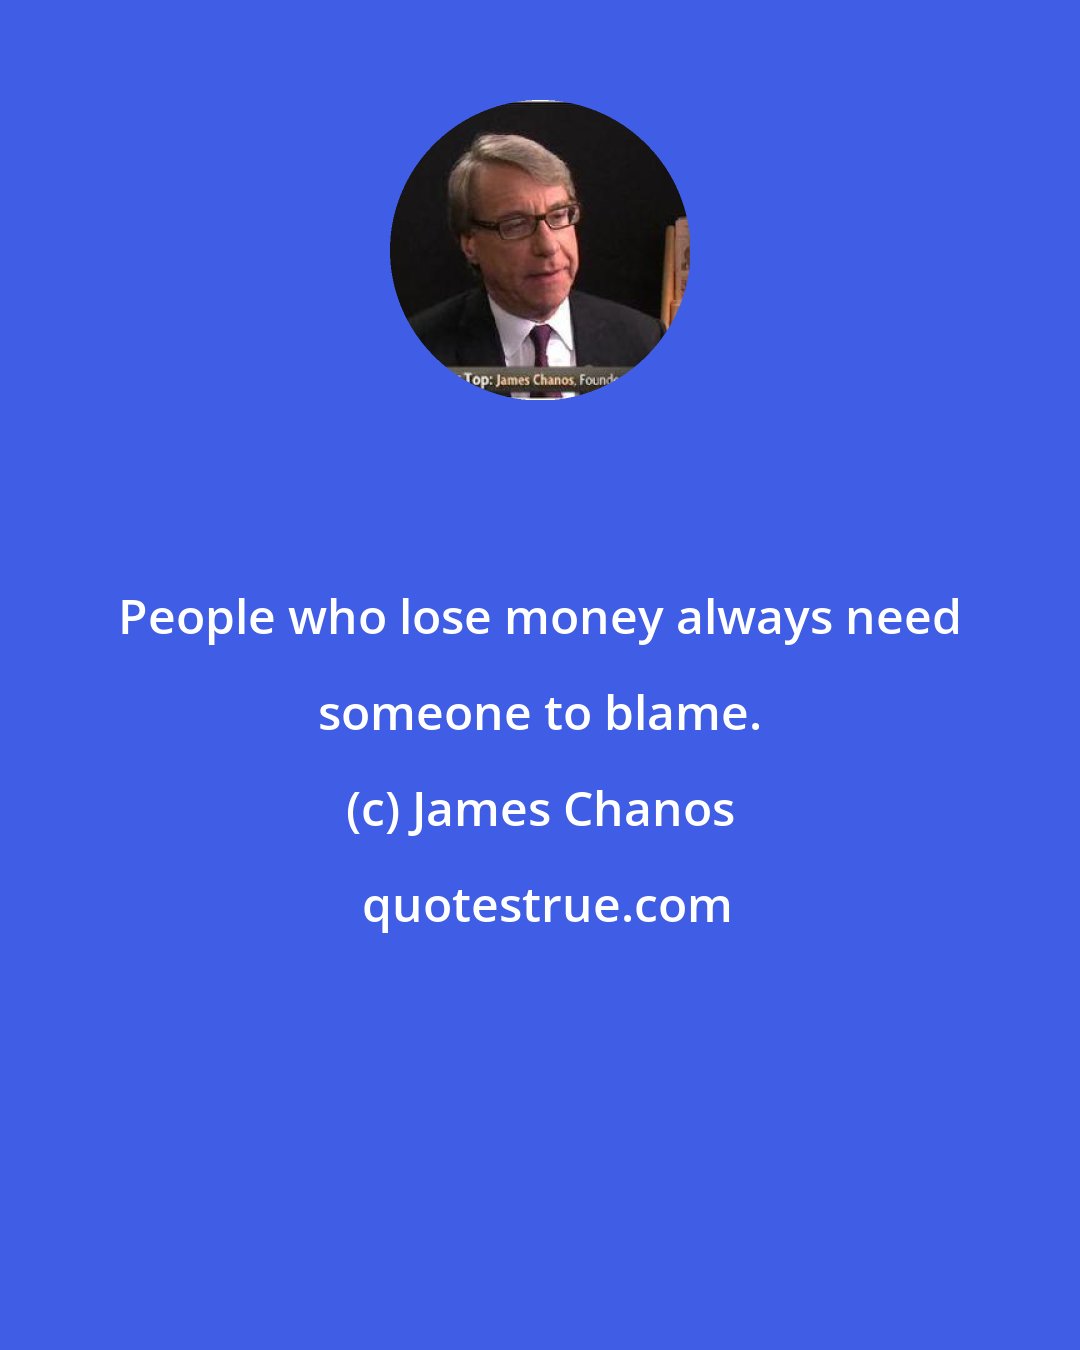 James Chanos: People who lose money always need someone to blame.